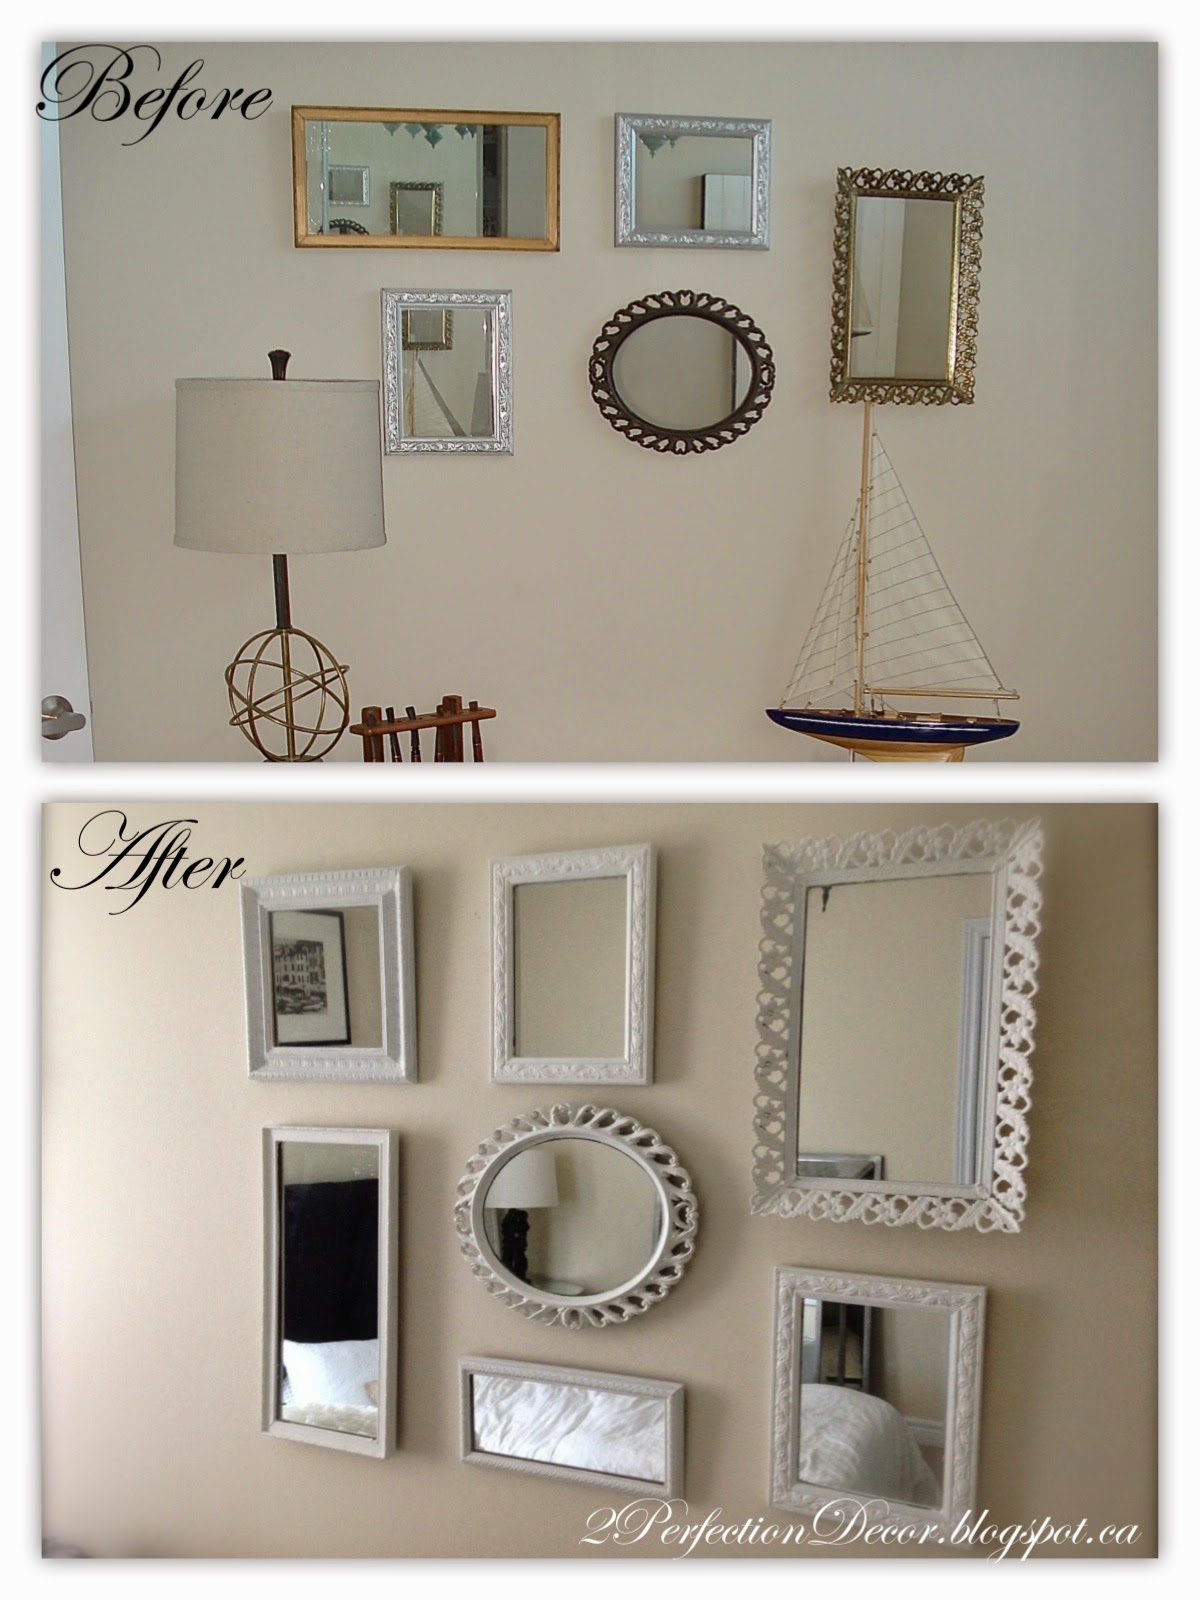 2Perfection Decor: Painted Mirror Collage